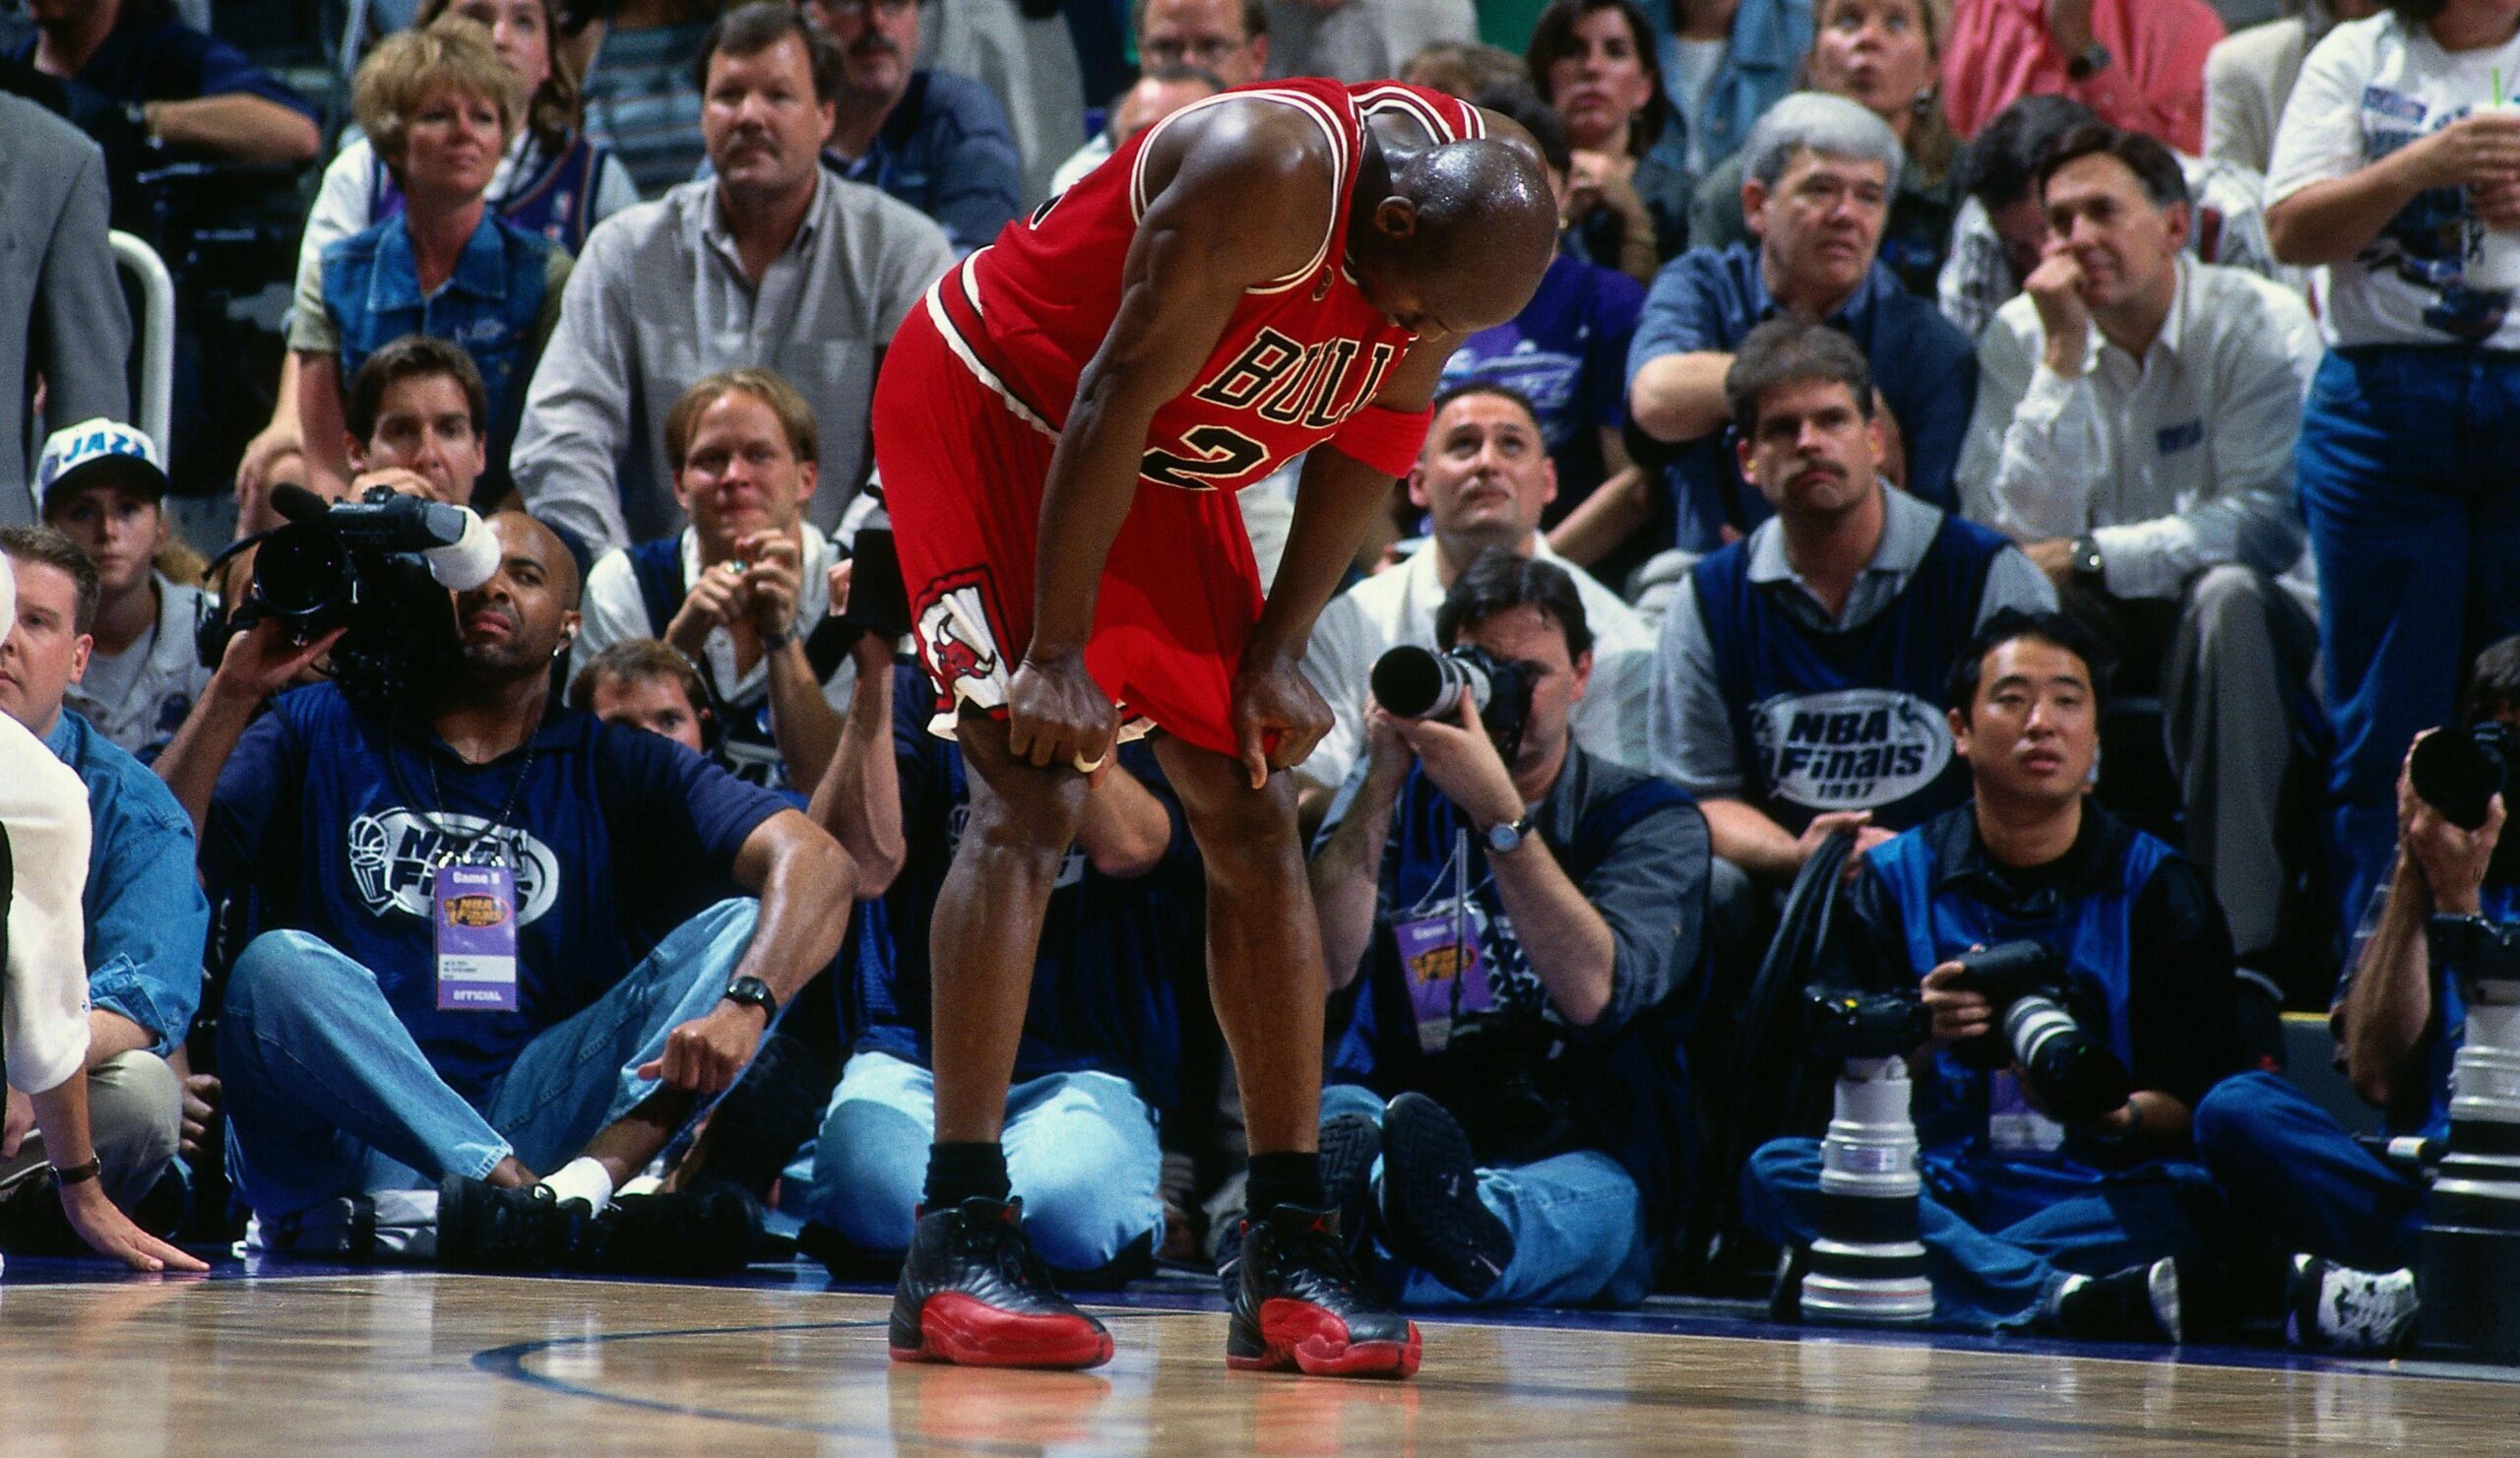 Michael Canyon jordan wearing the Canyon jordan Brand Honors Carmelo Anthony's Basketball Career With Special Canyon jordan trainer 1 low concord PE in the Flu Game